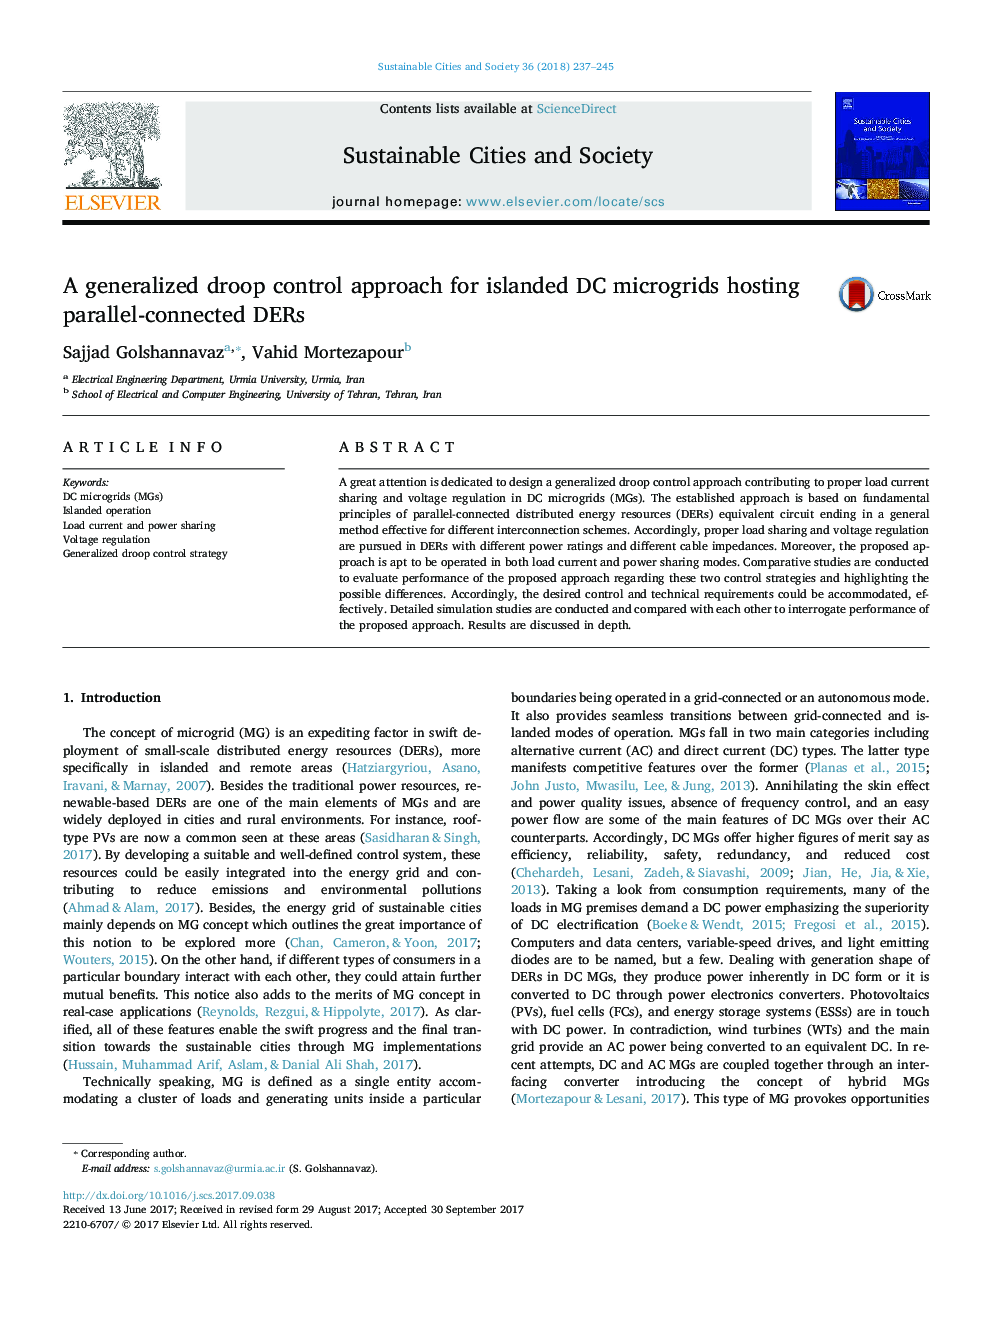 A generalized droop control approach for islanded DC microgrids hosting parallel-connected DERs